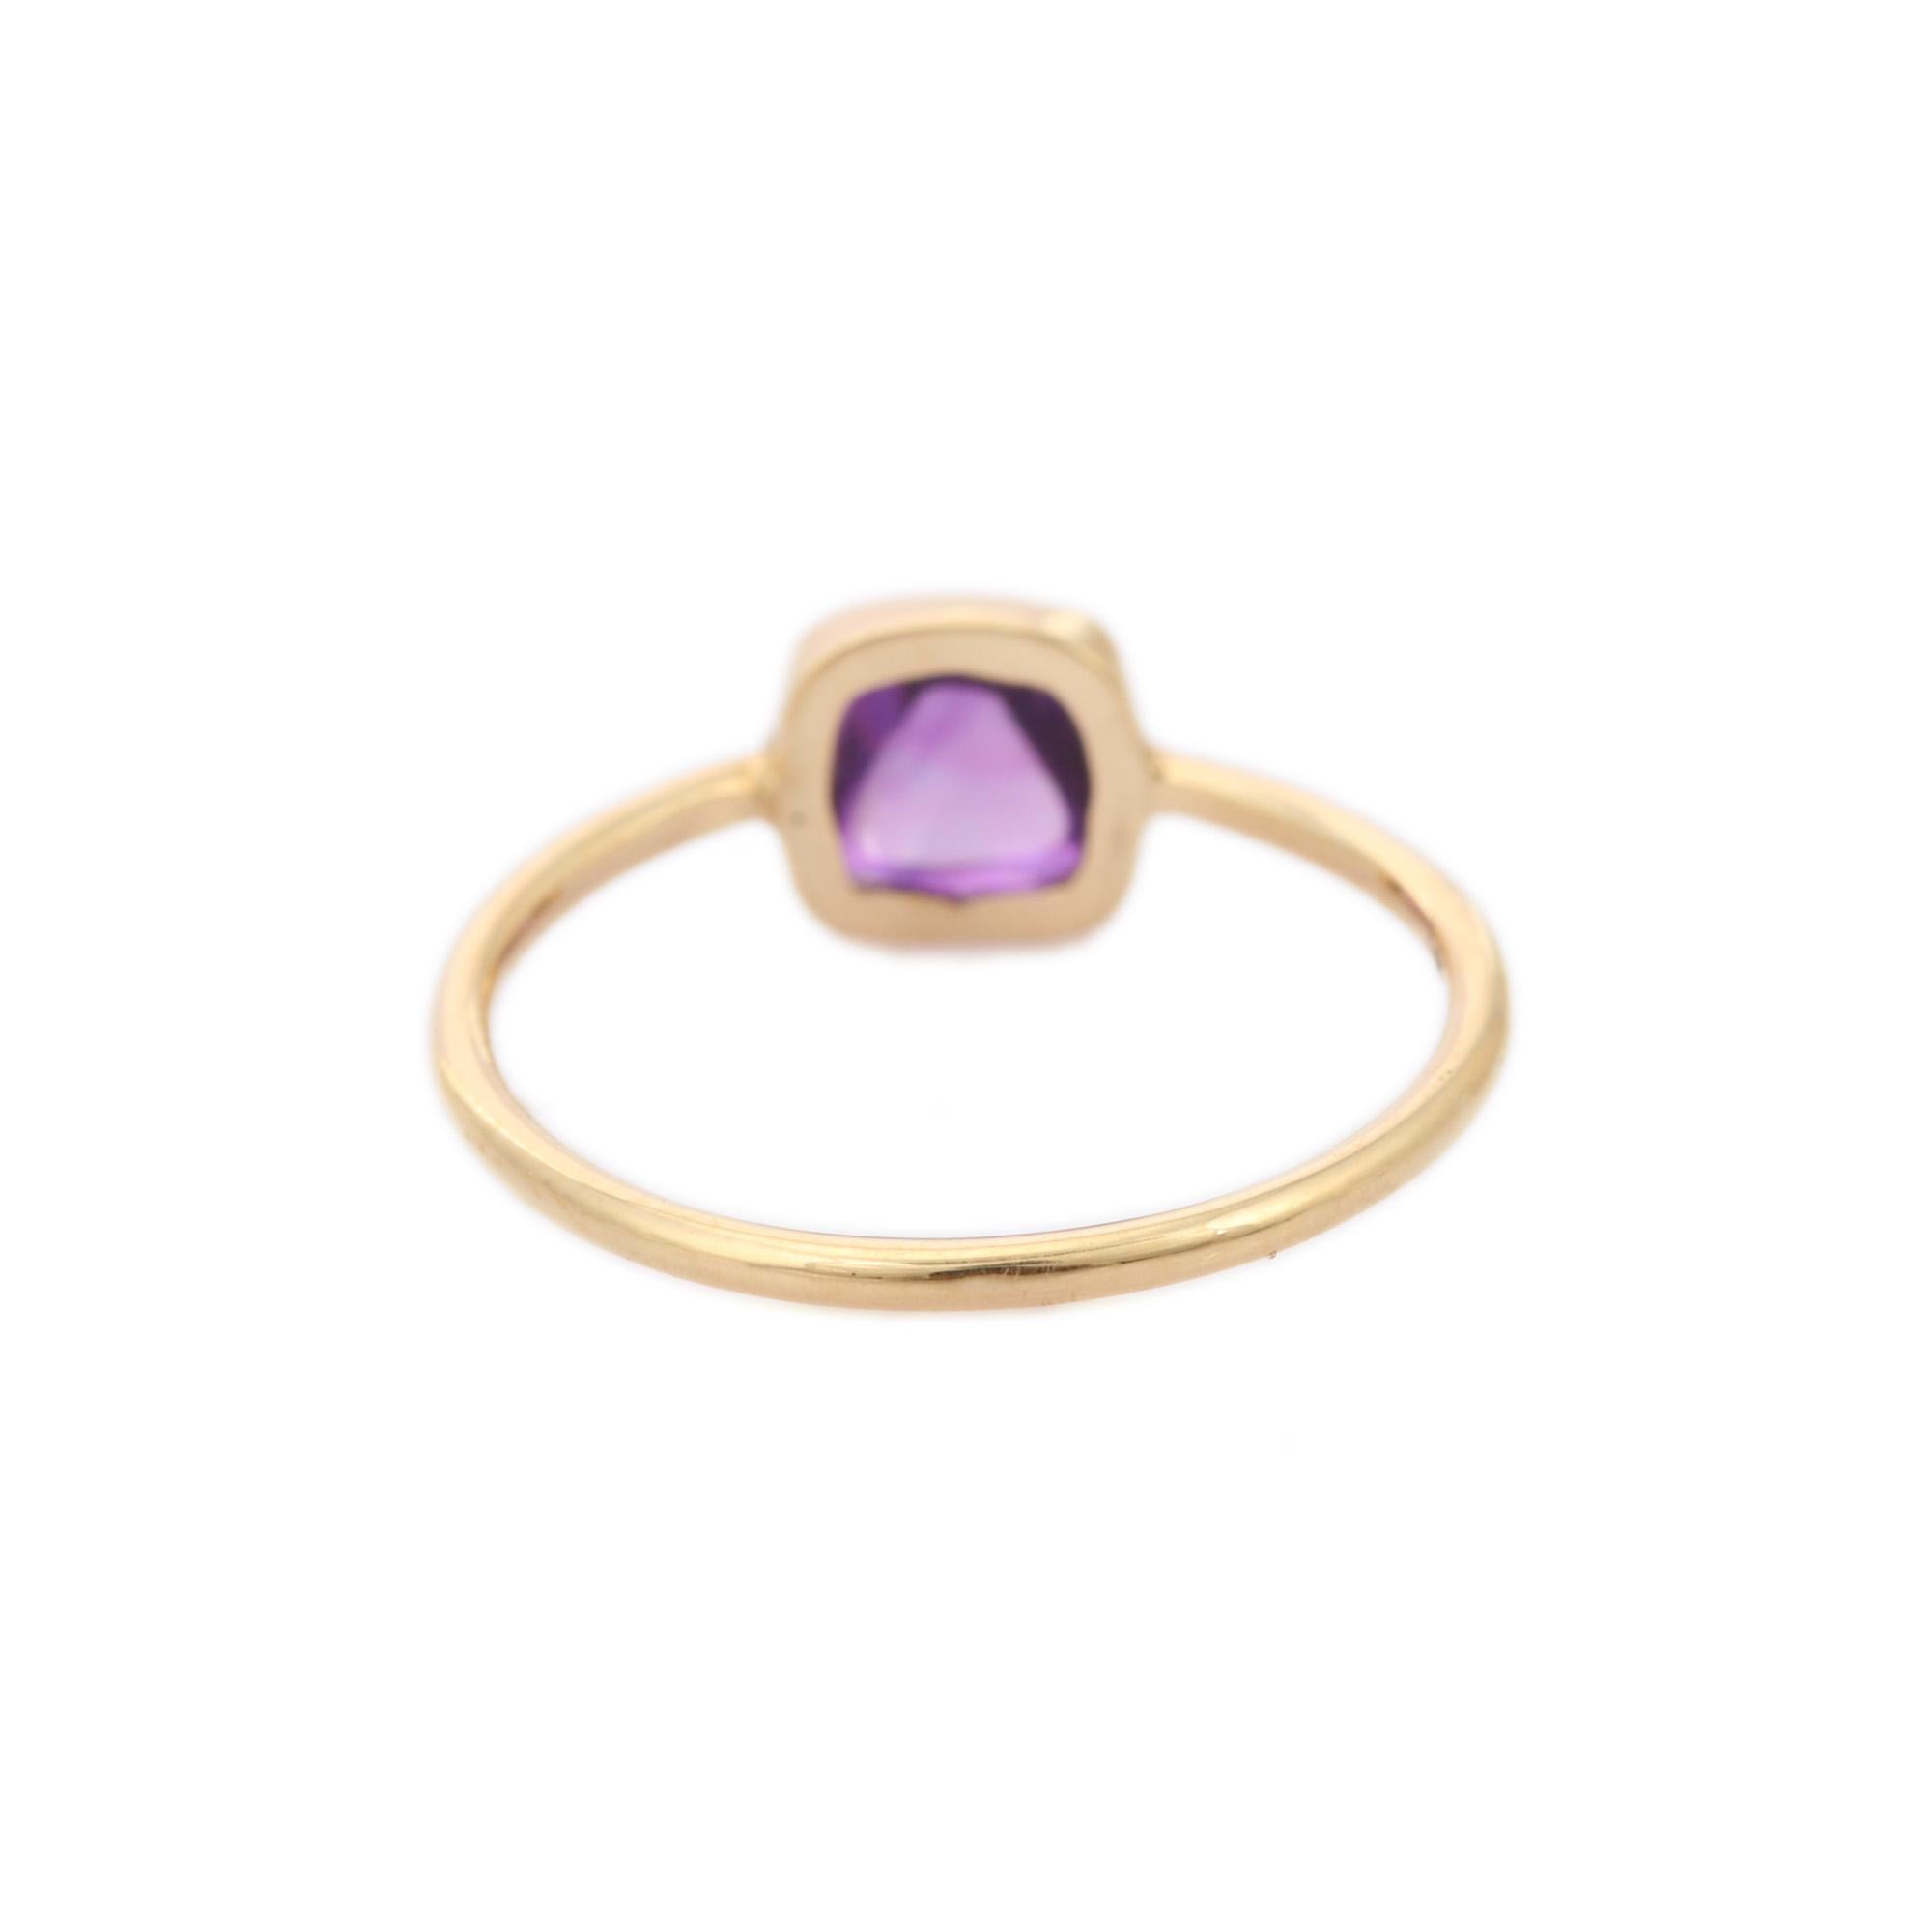 For Sale:  Cushion Cut Amethyst Engagement Ring in 14K Yellow Gold 4